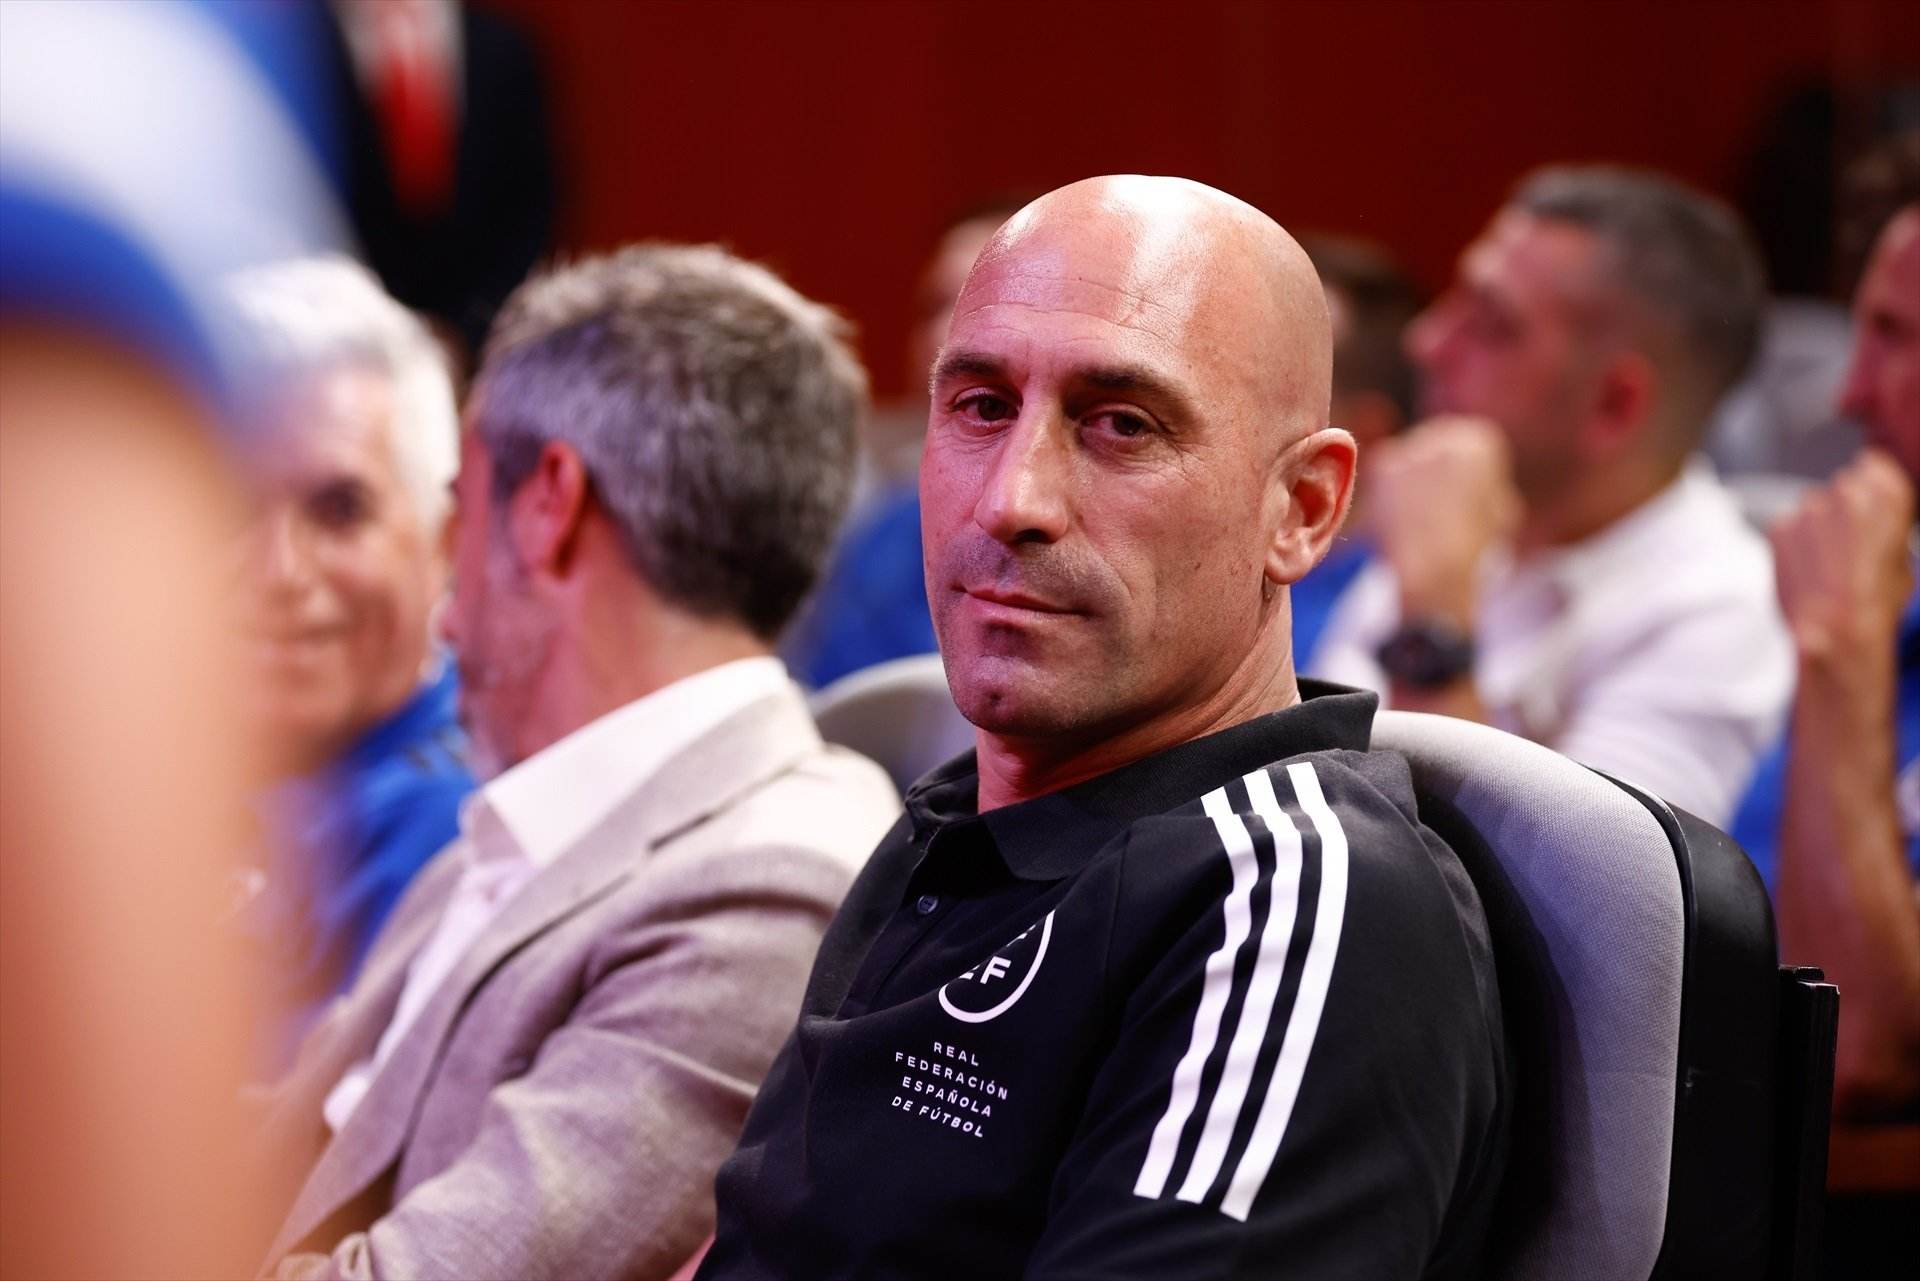 Luis Rubiales apologizes for kissing Jennifer Hermoso: "I probably made a mistake"